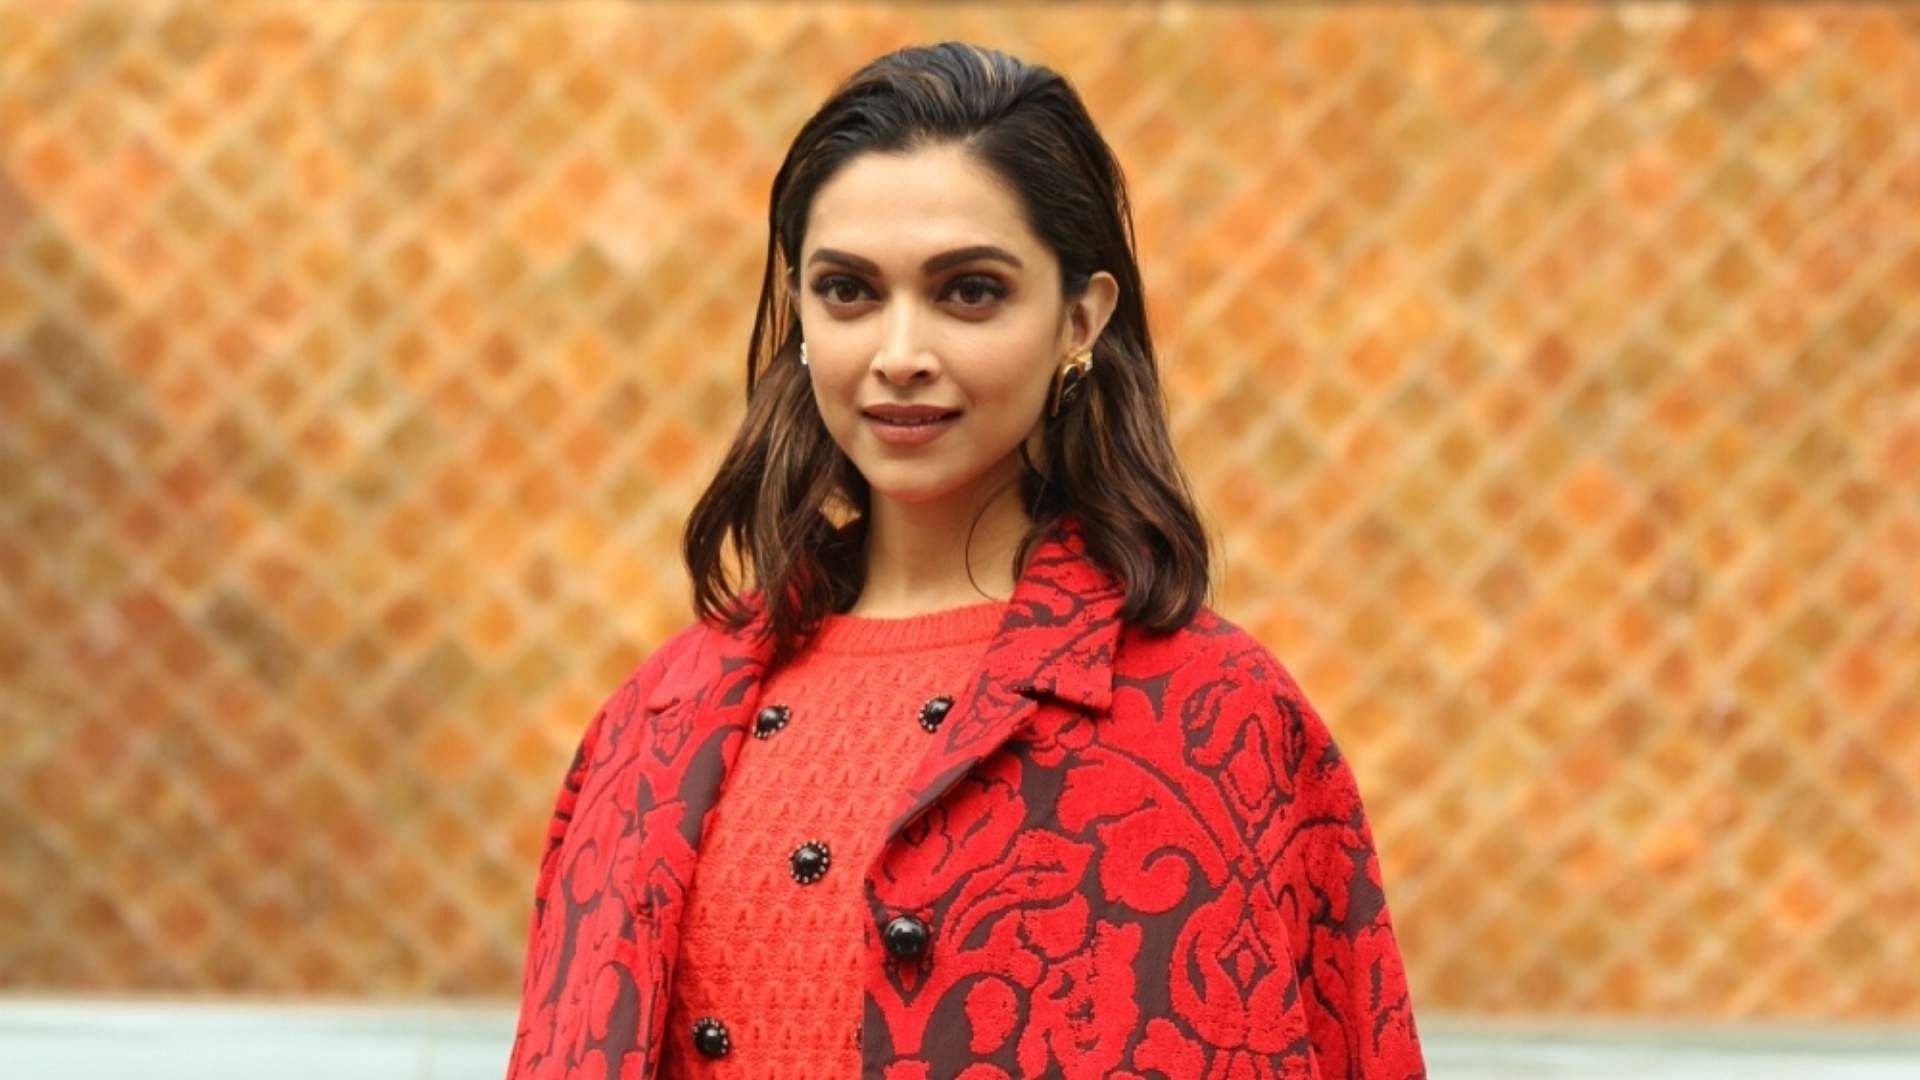 Deepika Padukone becomes the first Bollywood diva to be a part of Louis  Vuitton's pre-fall 2020 campaign along with Sophie Turner, Lea Seydoux and  others